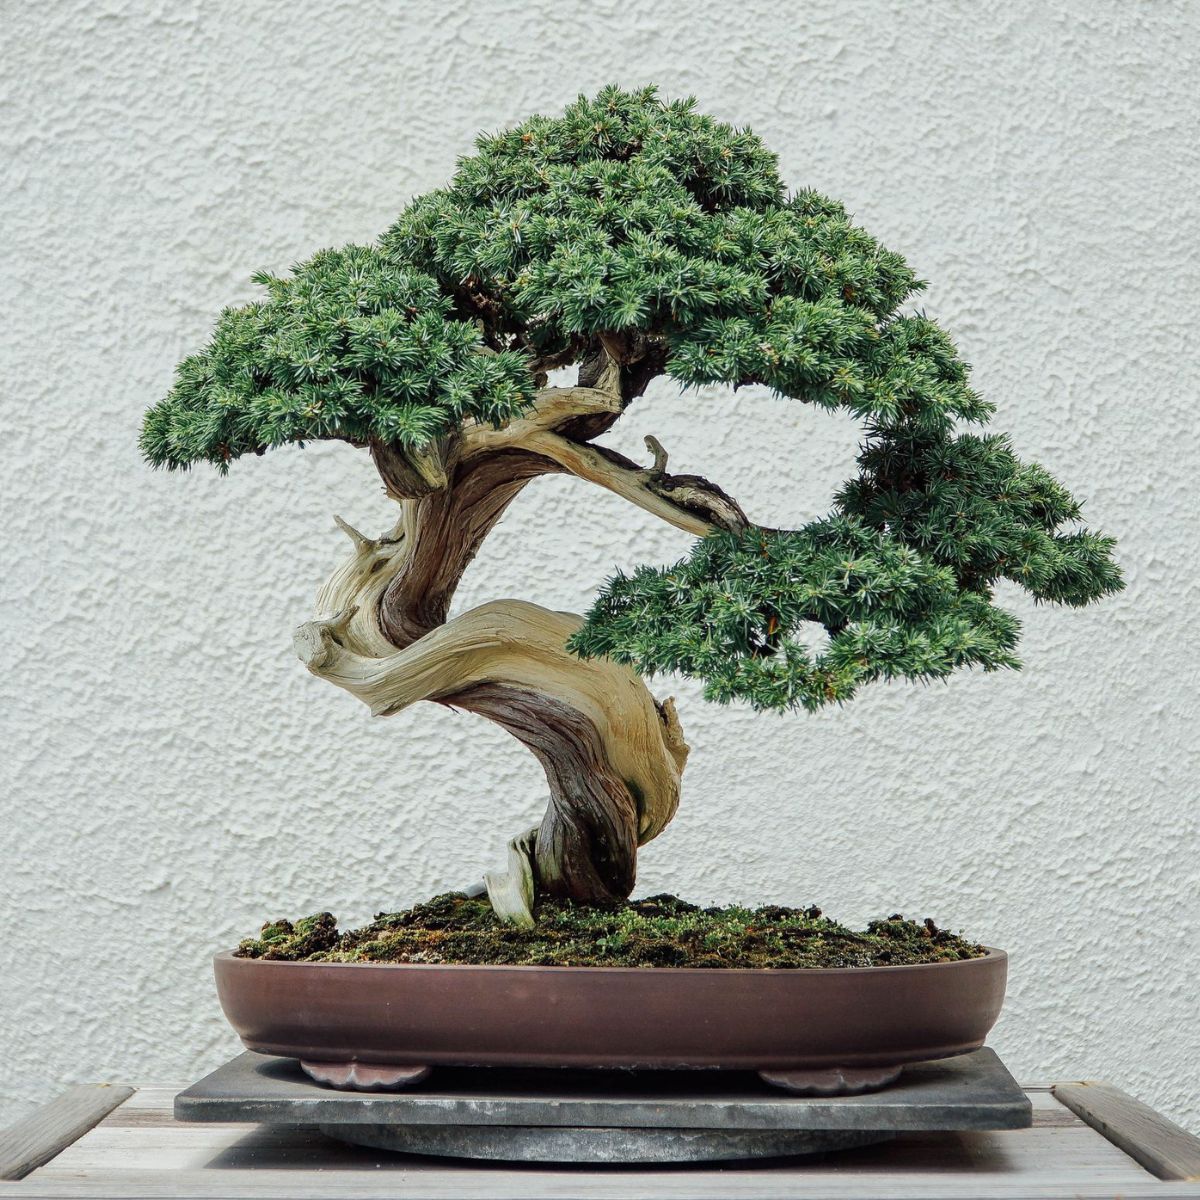 Bonsai are one of the most popular indoor plants to have a miniature tree at home on Thursdays